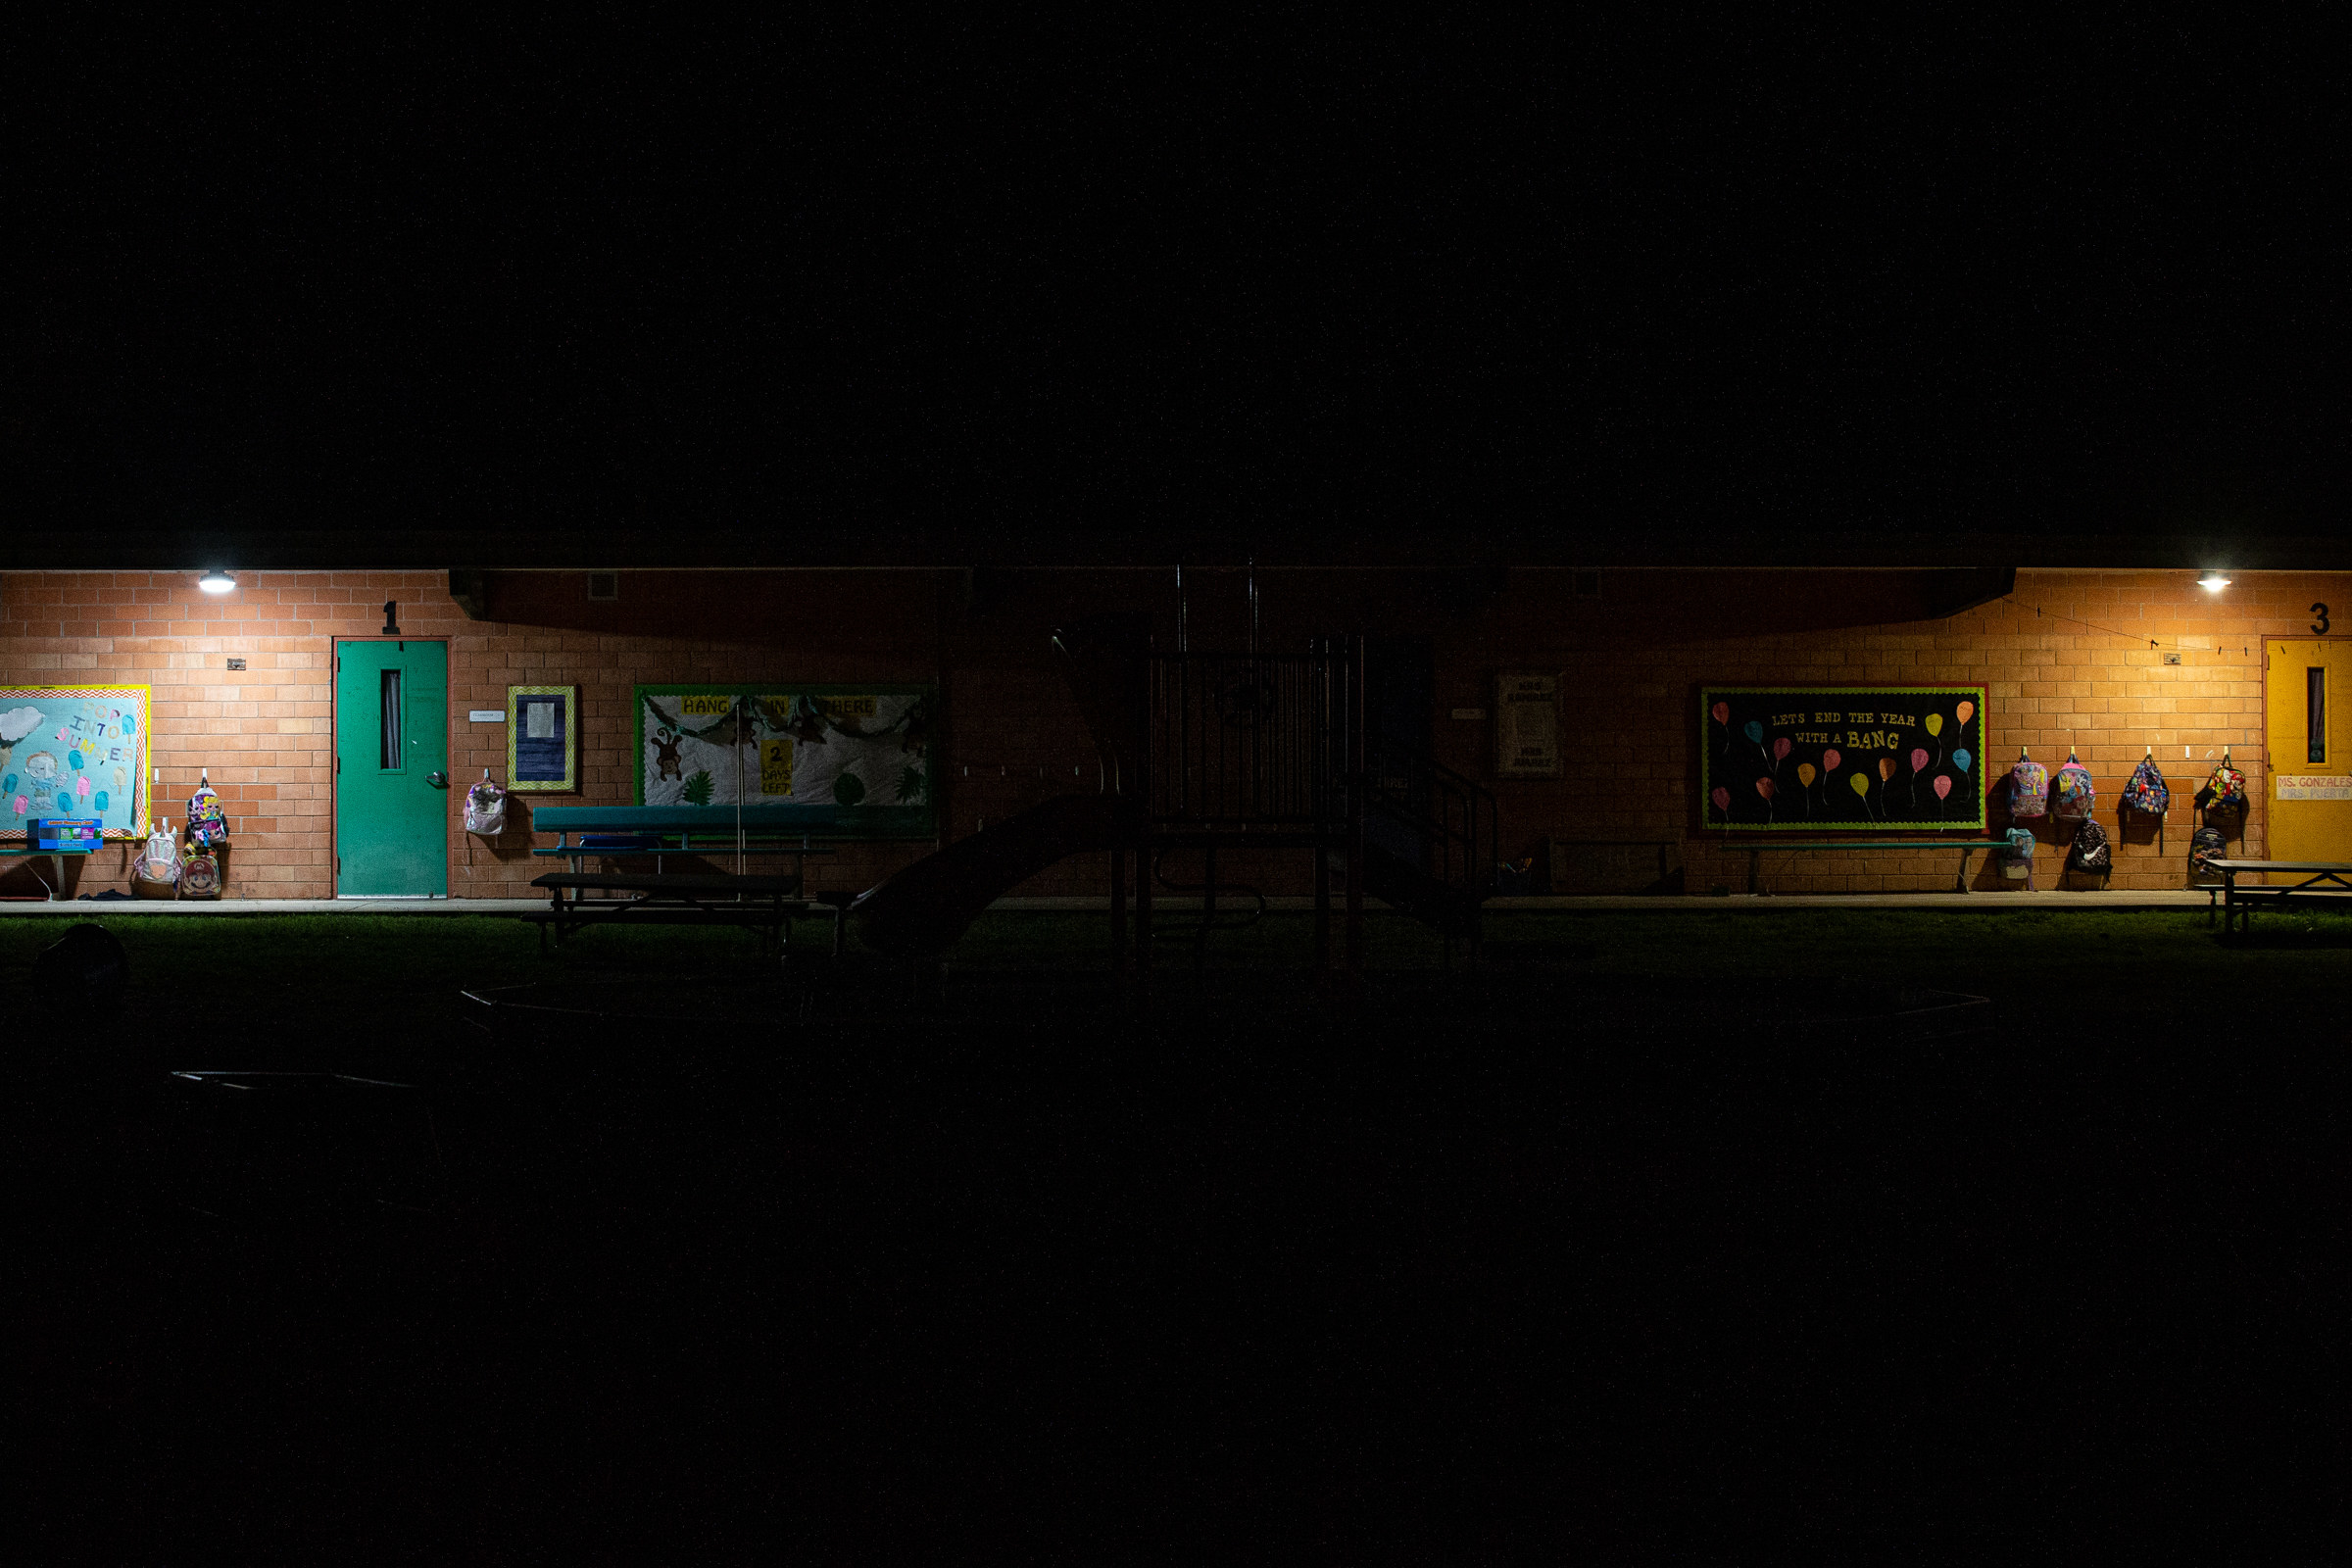 Overhead lights show classroom doors surrounded by brick walls and backpacks hanging on hooks overnight at a school